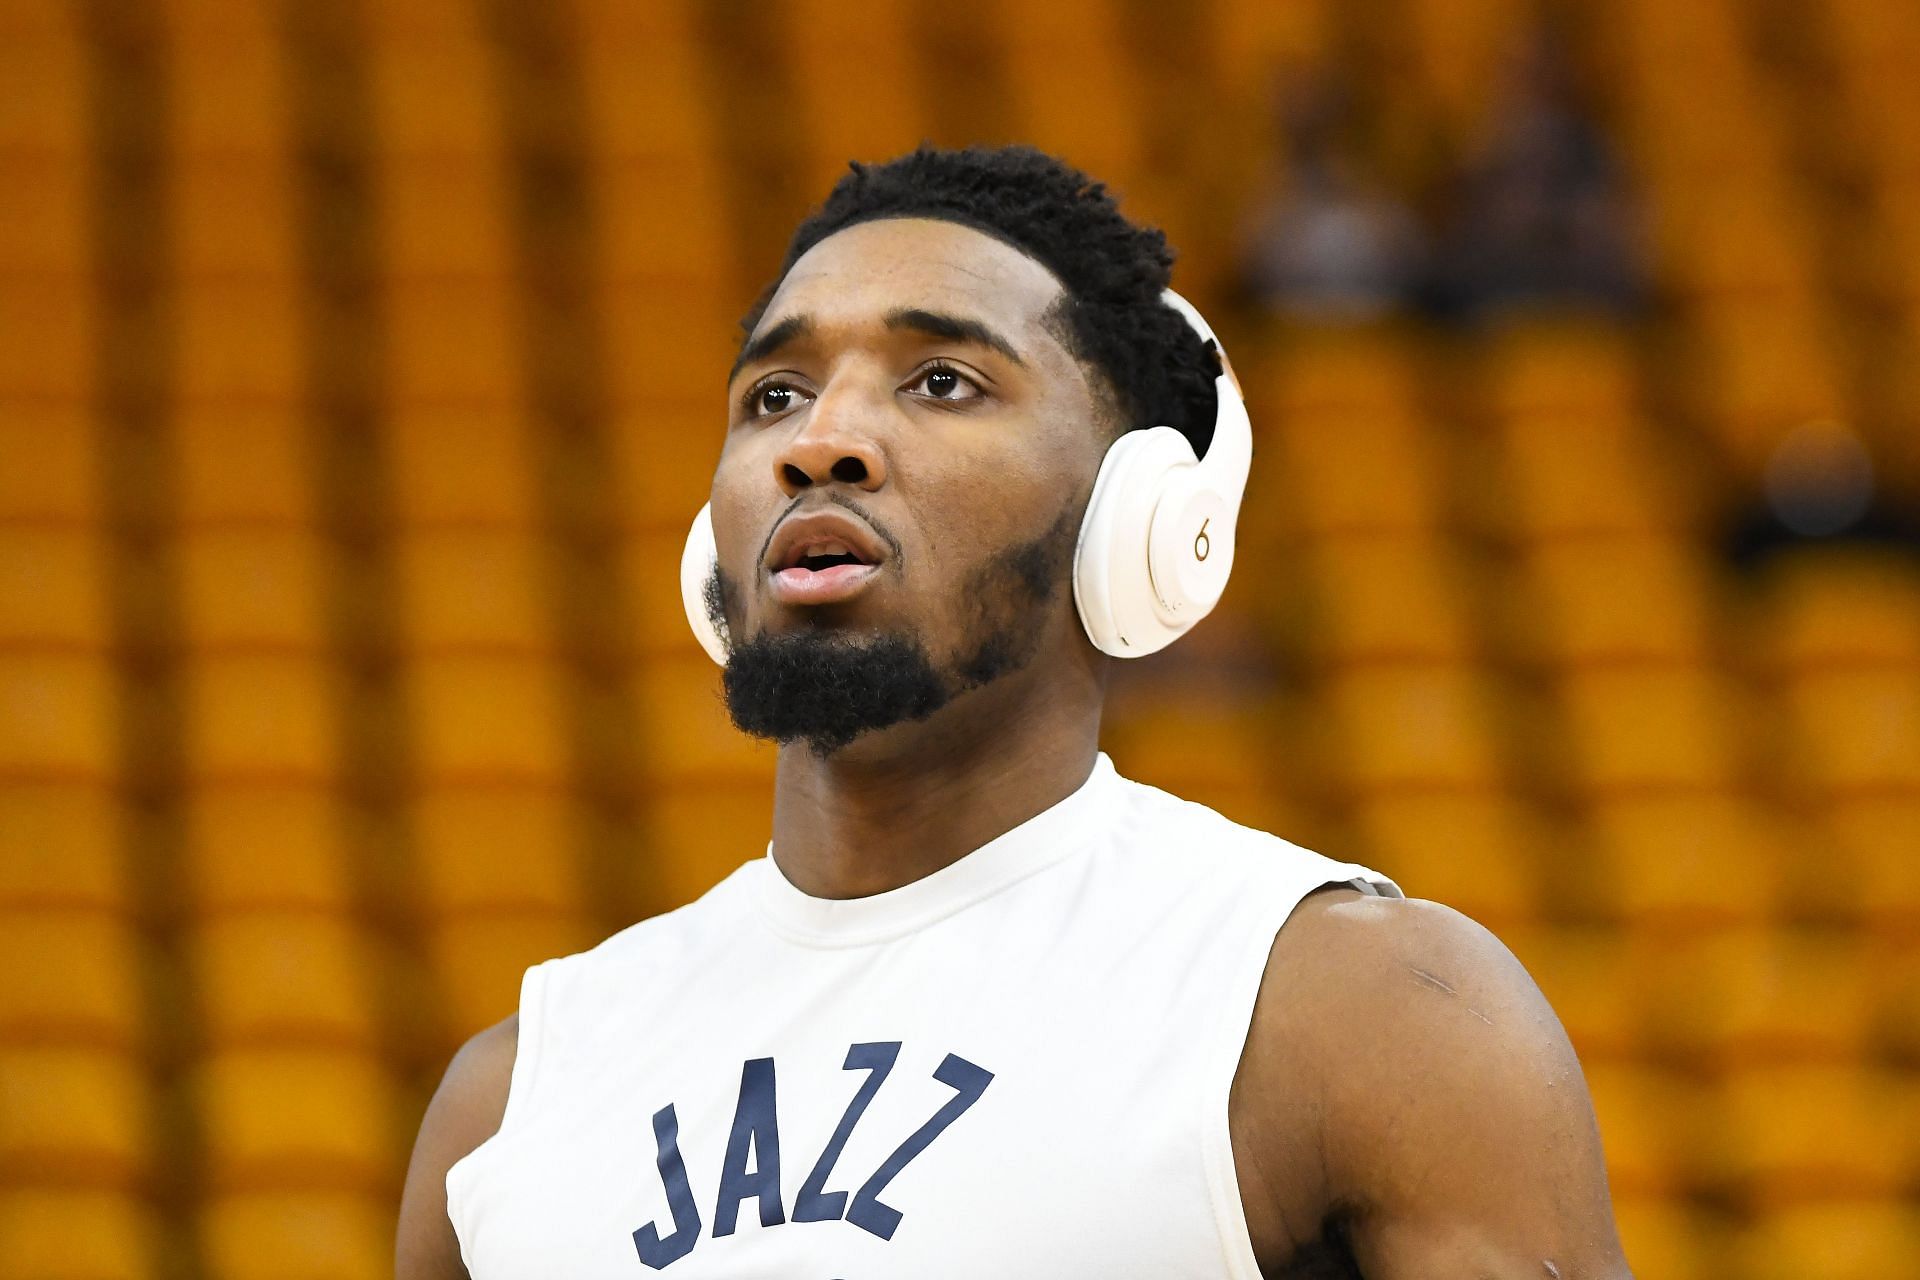 Utah Jazz star Donovan Mitchell has been rumored as a trade target for the New York Knicks